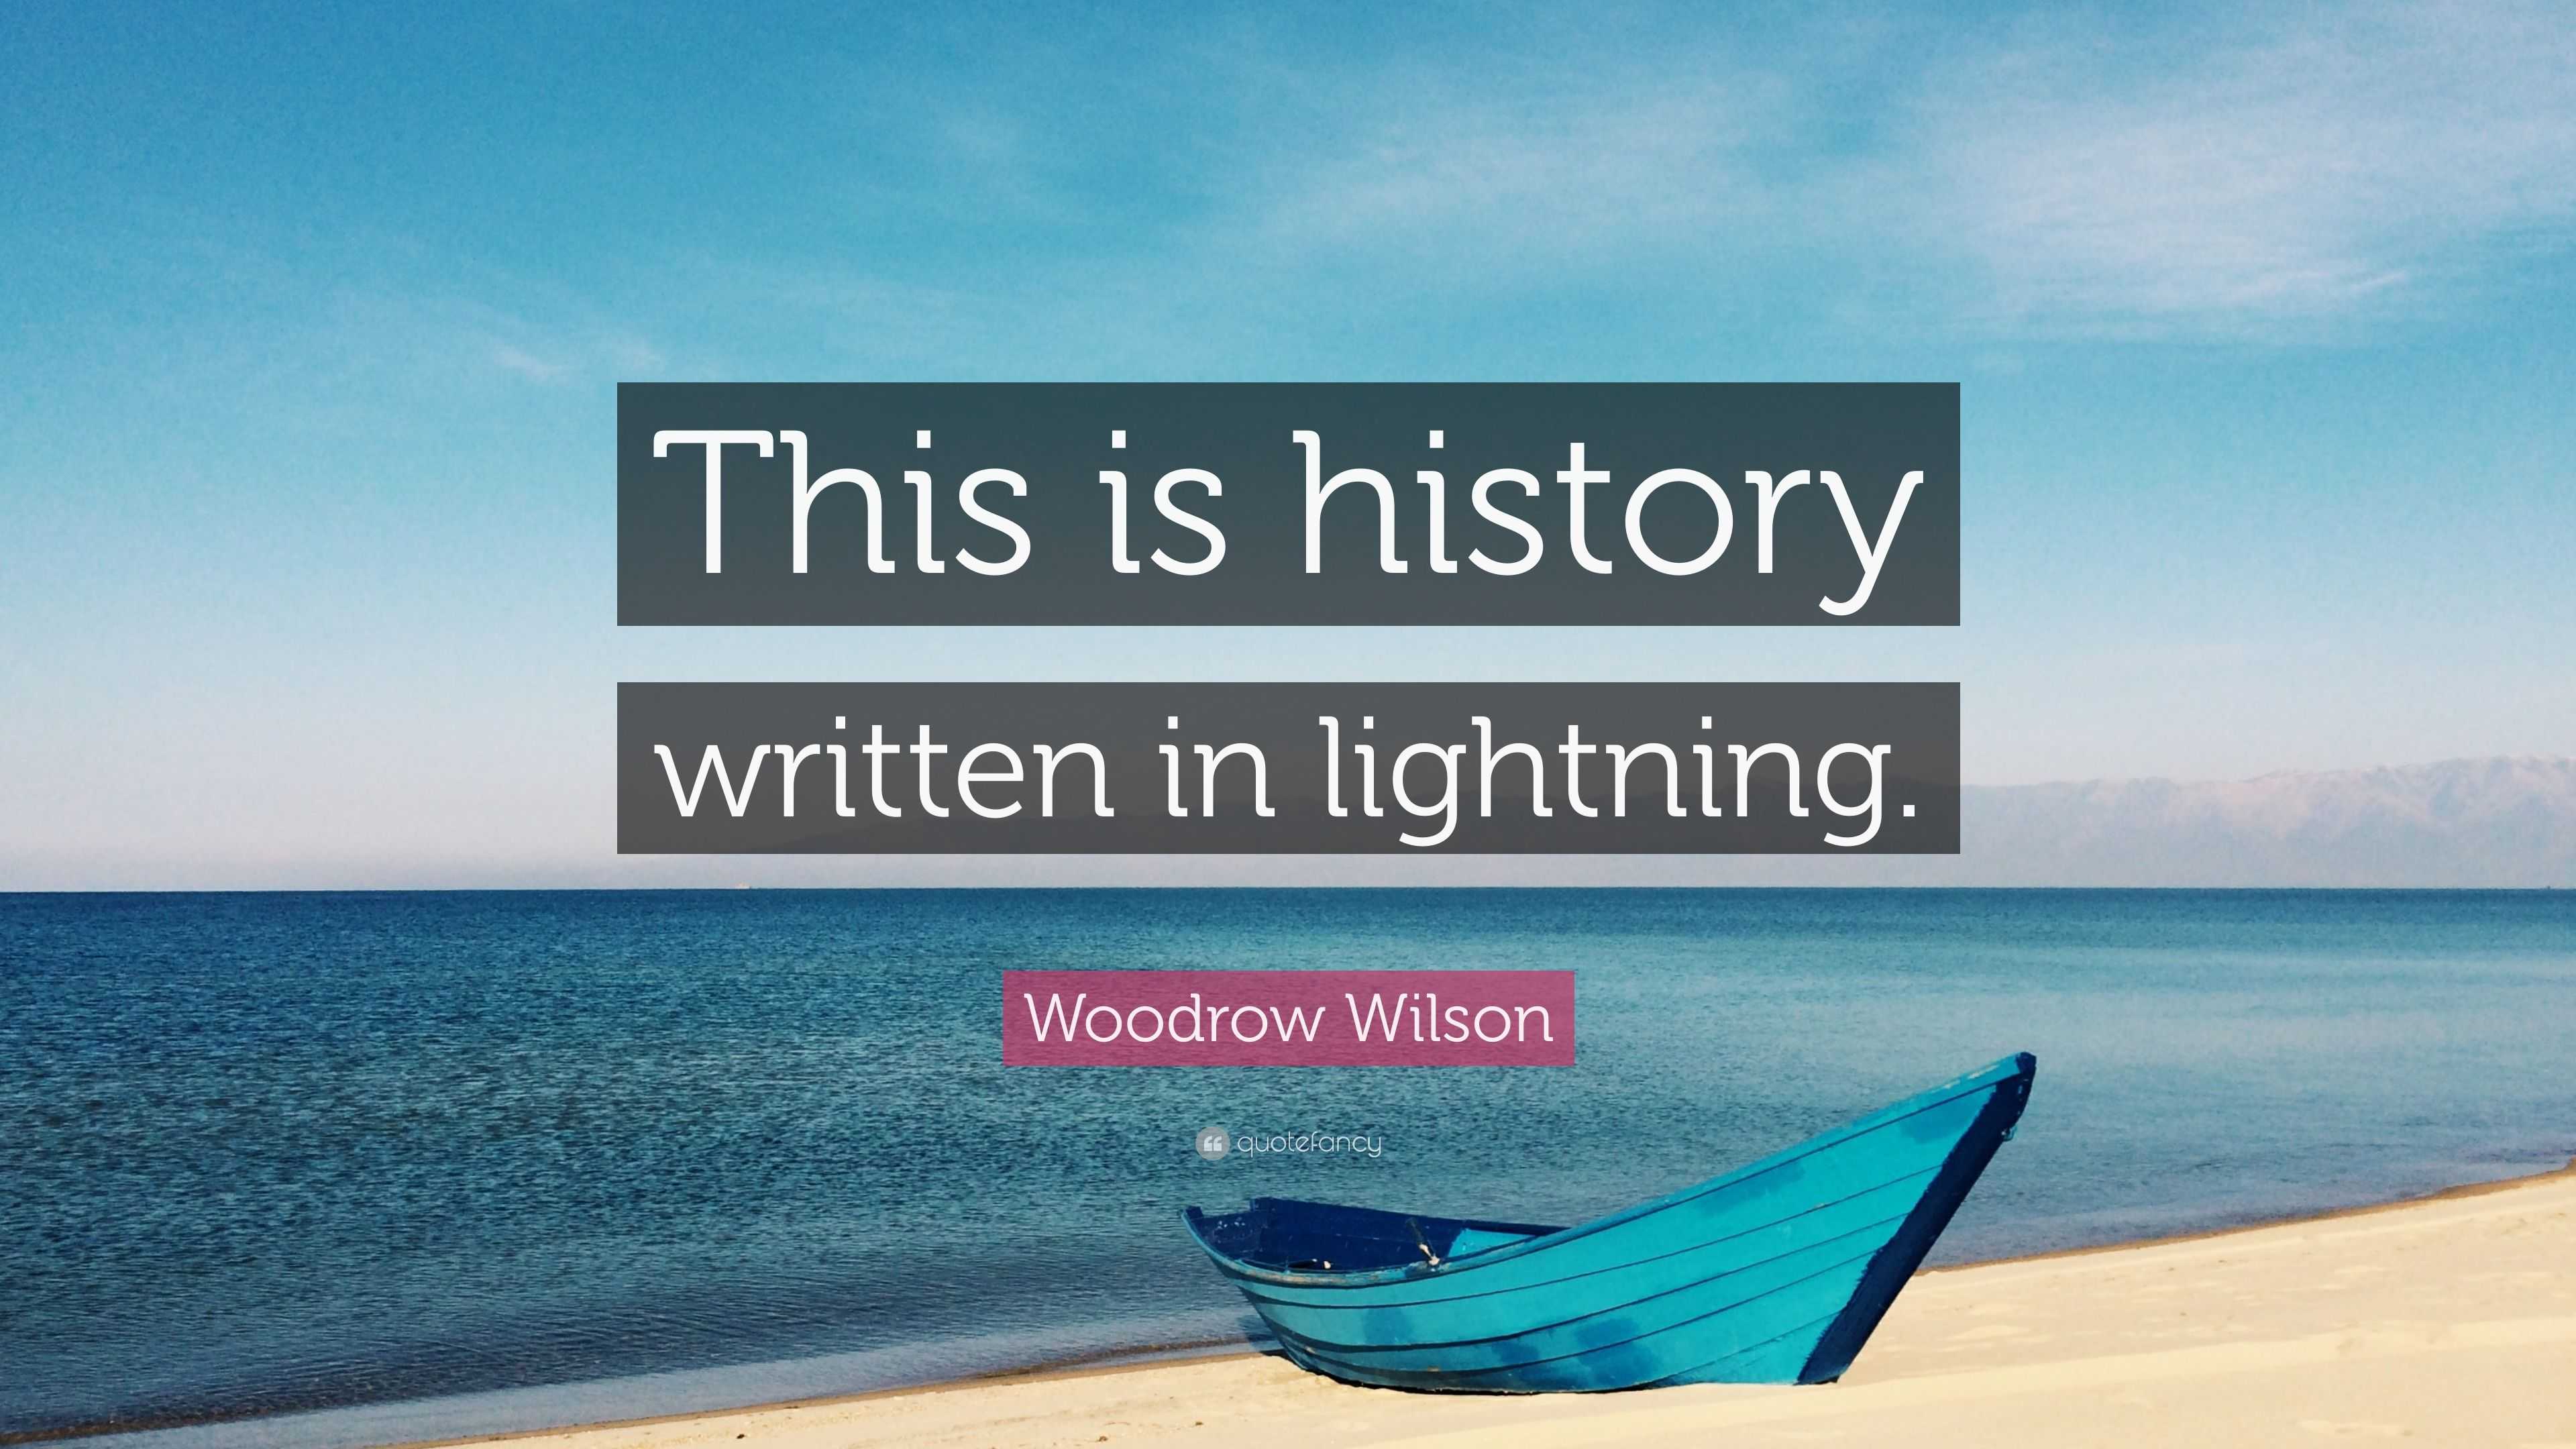 Woodrow Wilson Quote: “This is history written in lightning.”